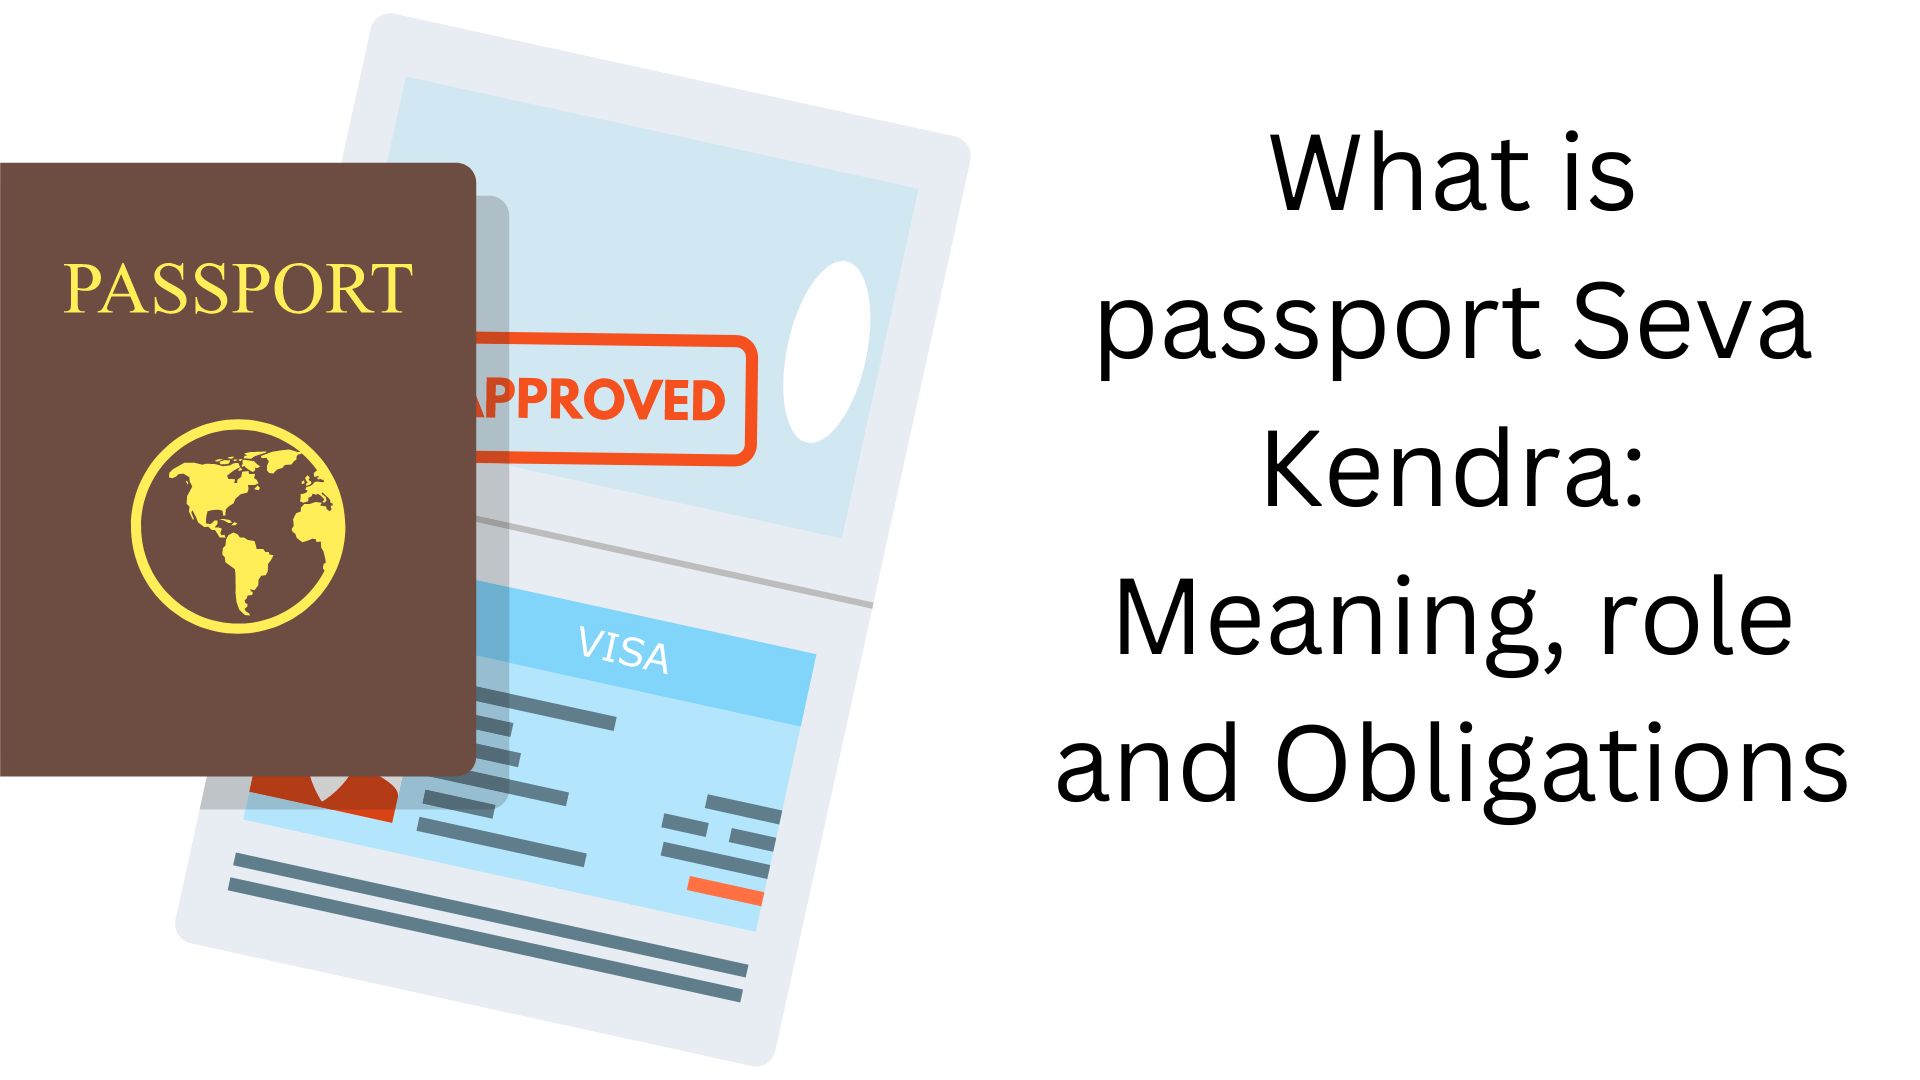 What is passport Seva Kendra Meaning, role and Obligations